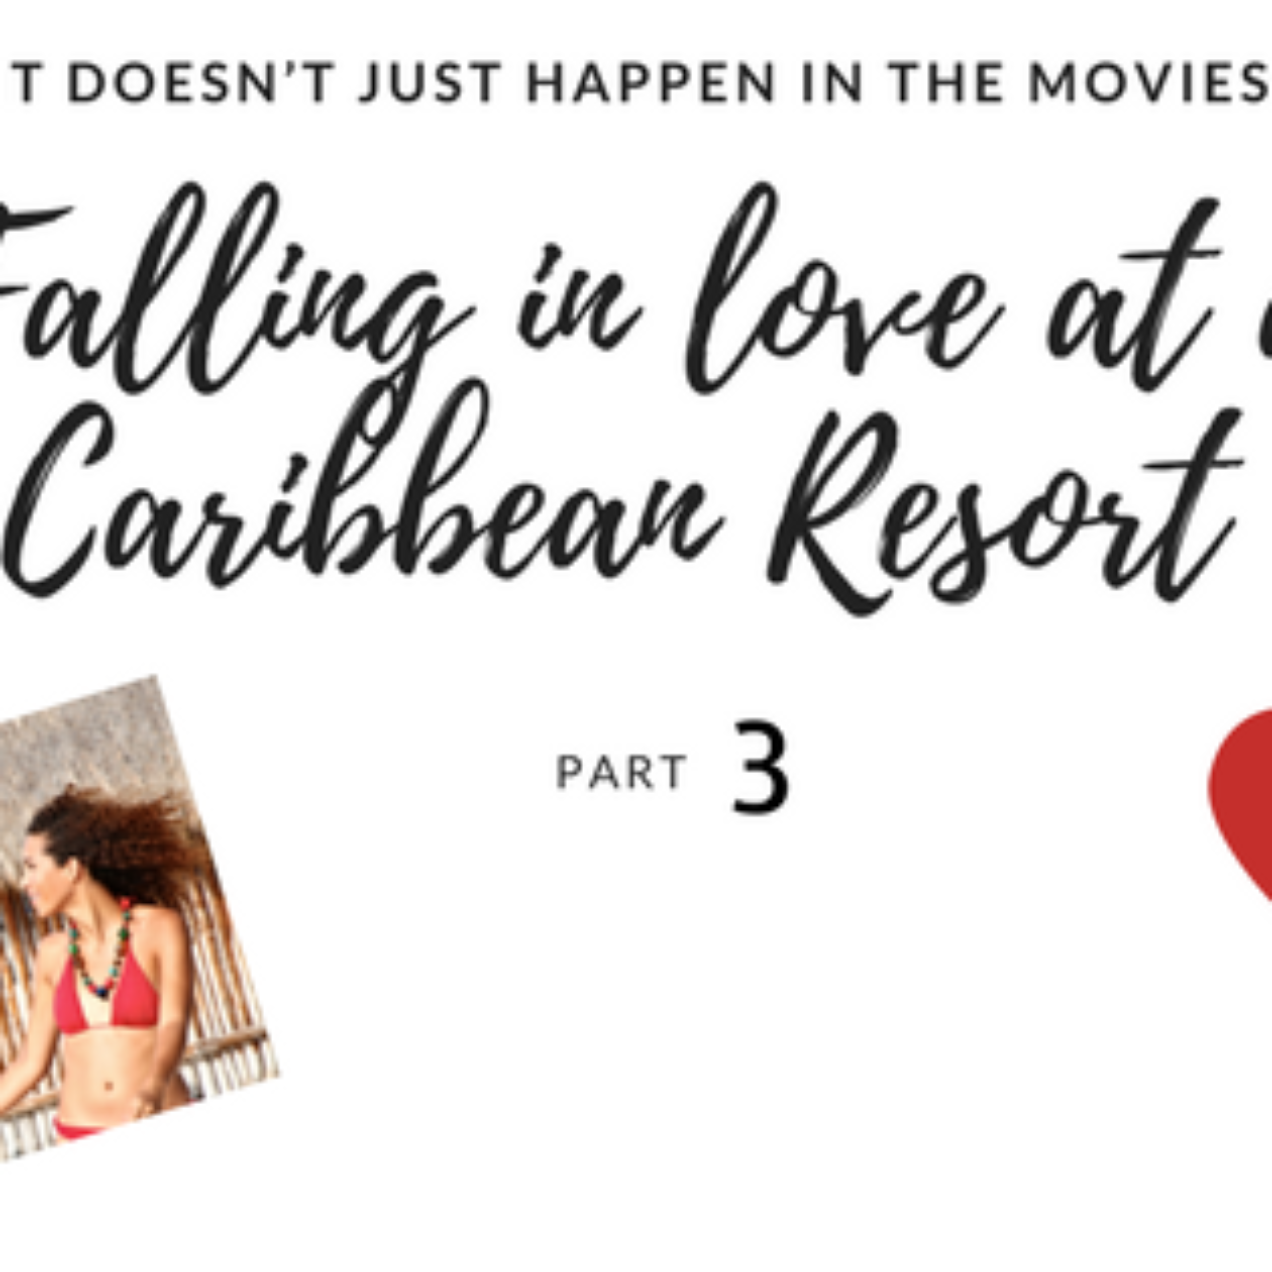 It doesn’t just happen in the movies: Falling in love at a Caribbean Resort (Part 3)